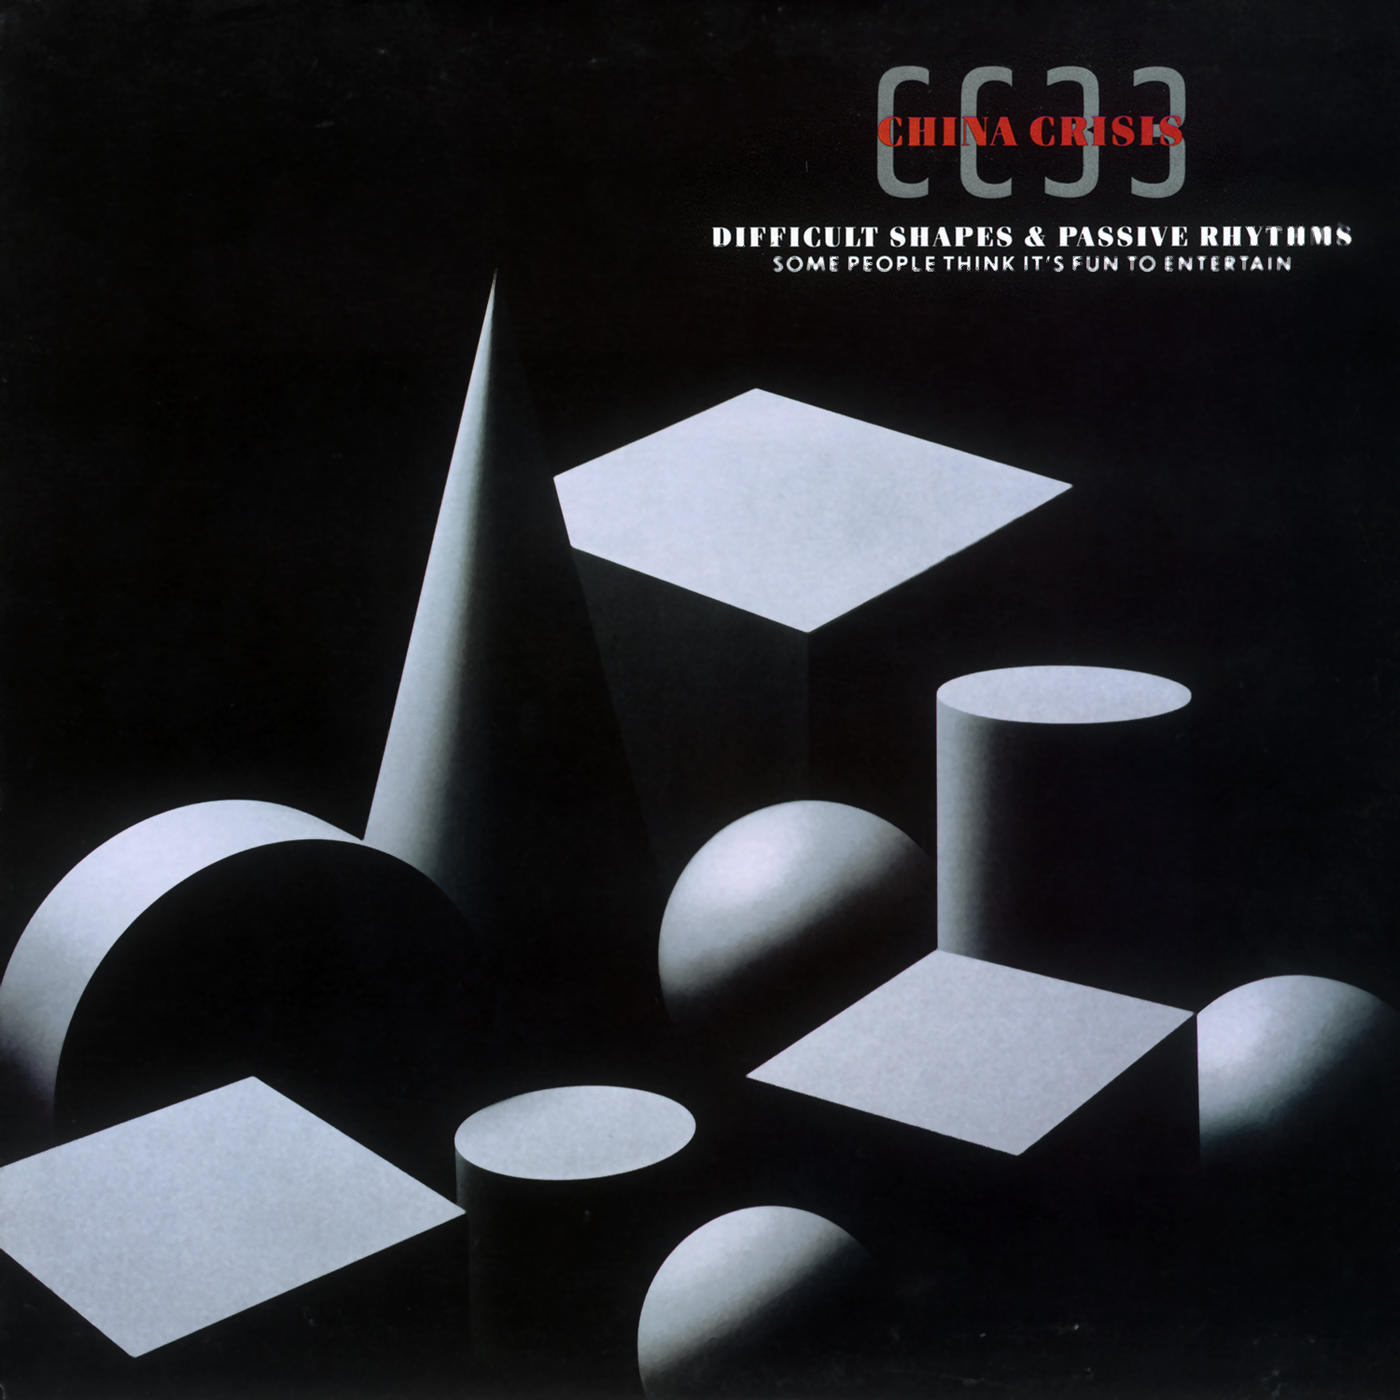 China Crisis Passive (CD) Rhythms Shapes Difficult - - And